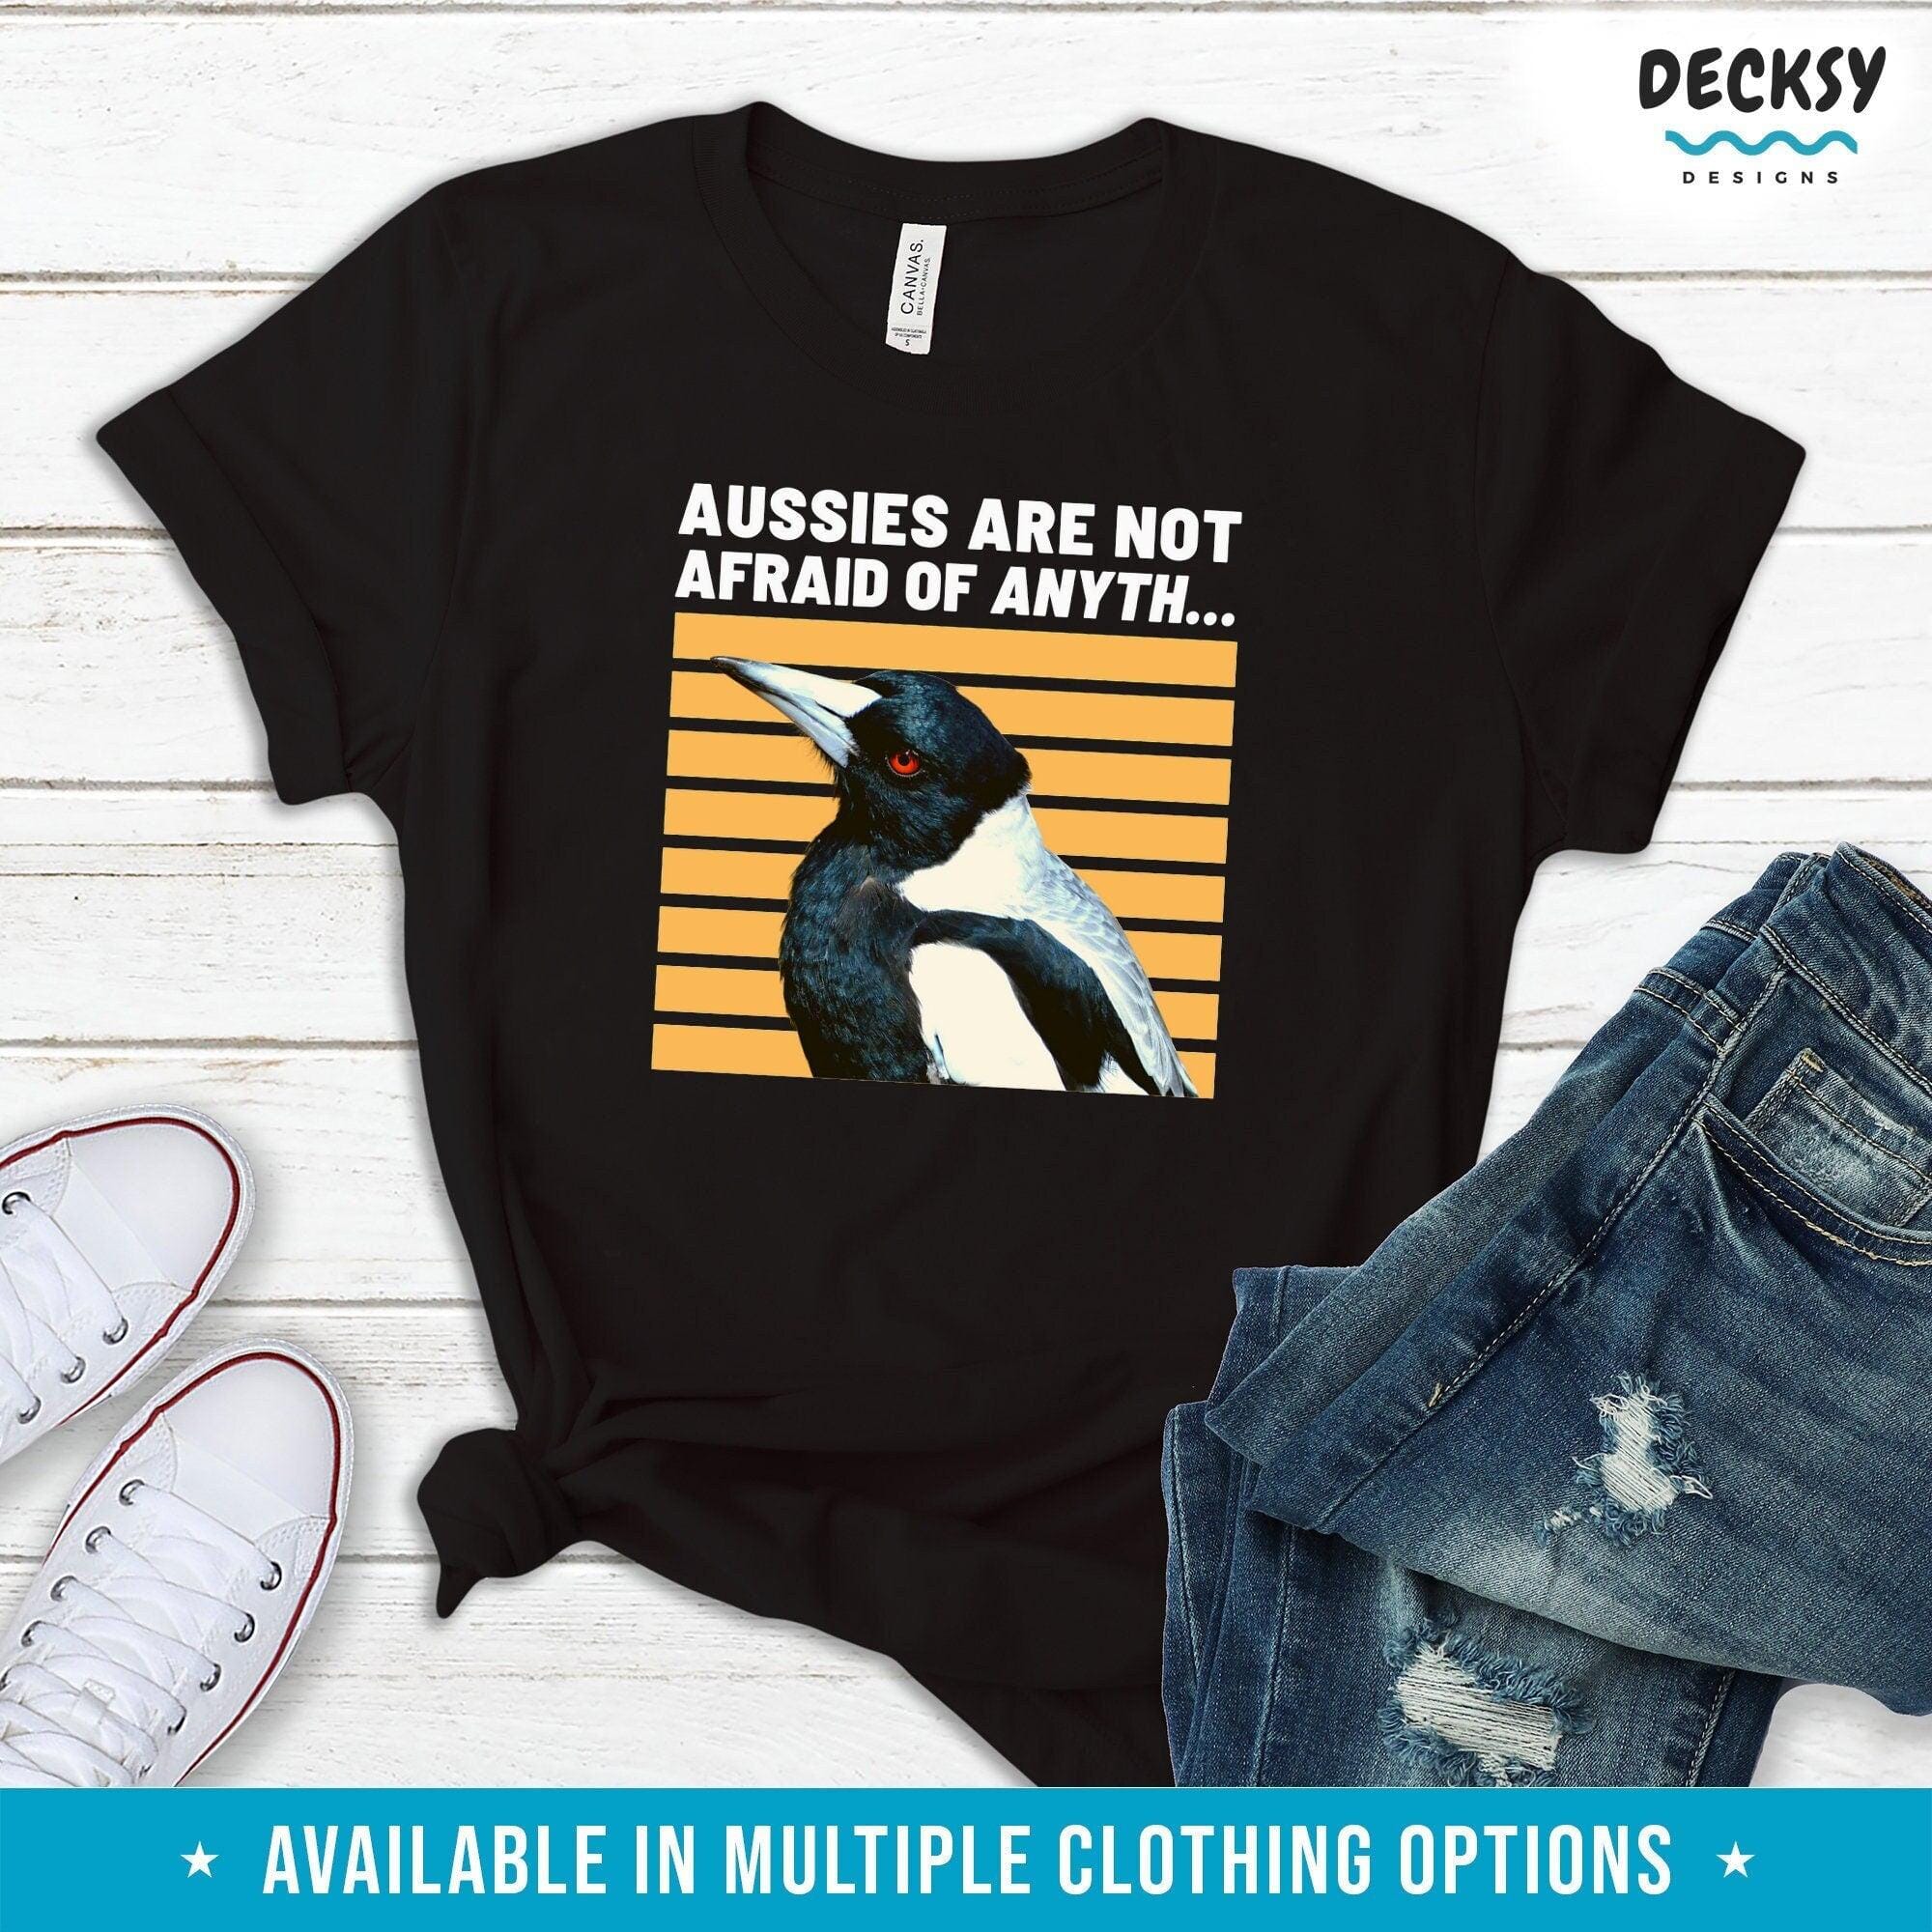 Magpie Shirt, Gift For Cyclist-Clothing:Gender-Neutral Adult Clothing:Tops & Tees:T-shirts:Graphic Tees-DecksyDesigns